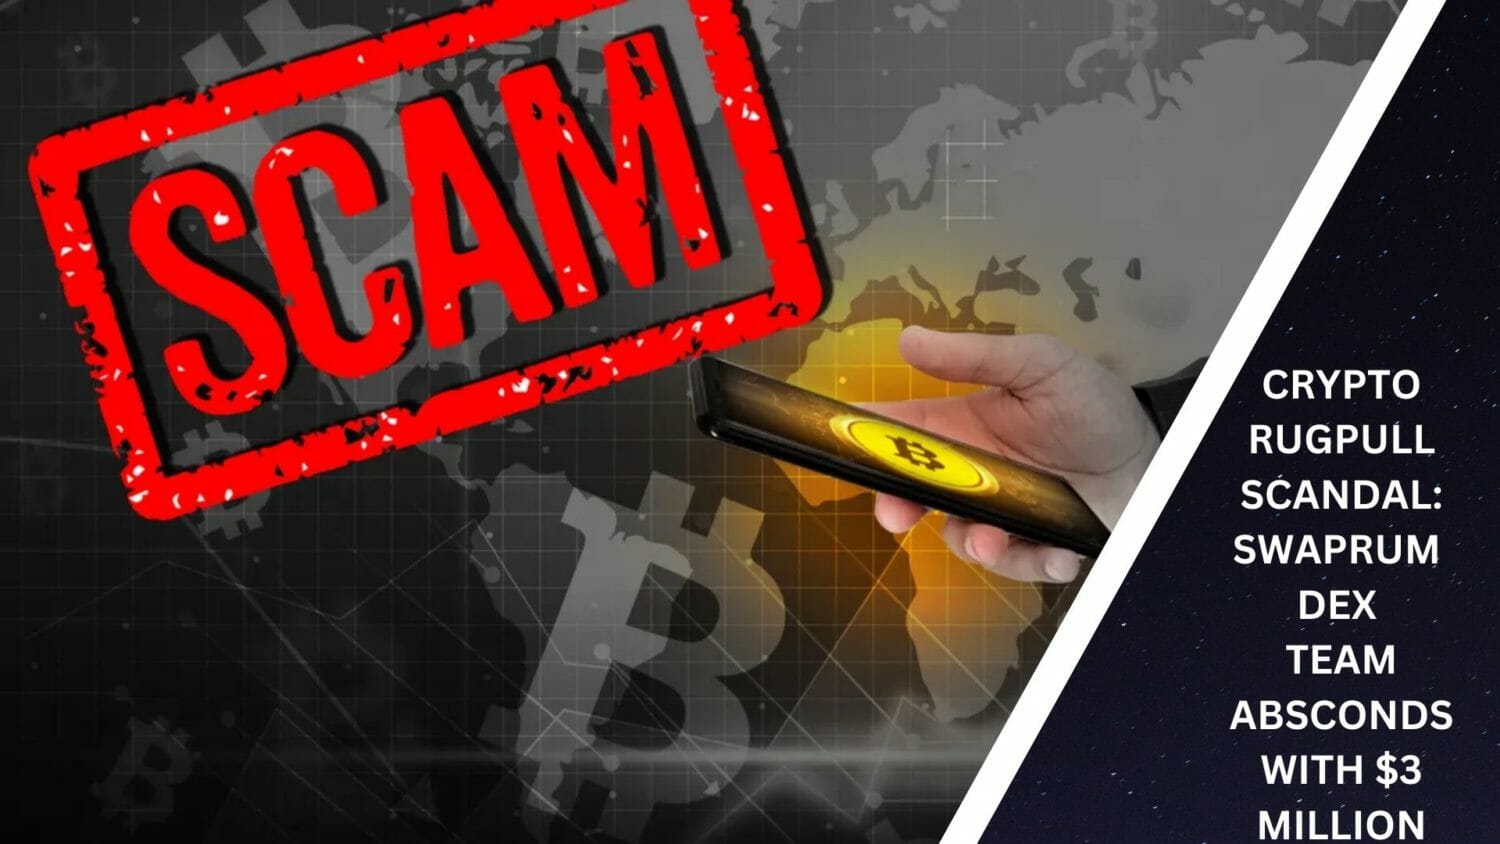 Crypto Rugpull Scandal: Swaprum Dex Team Absconds With $3 Million